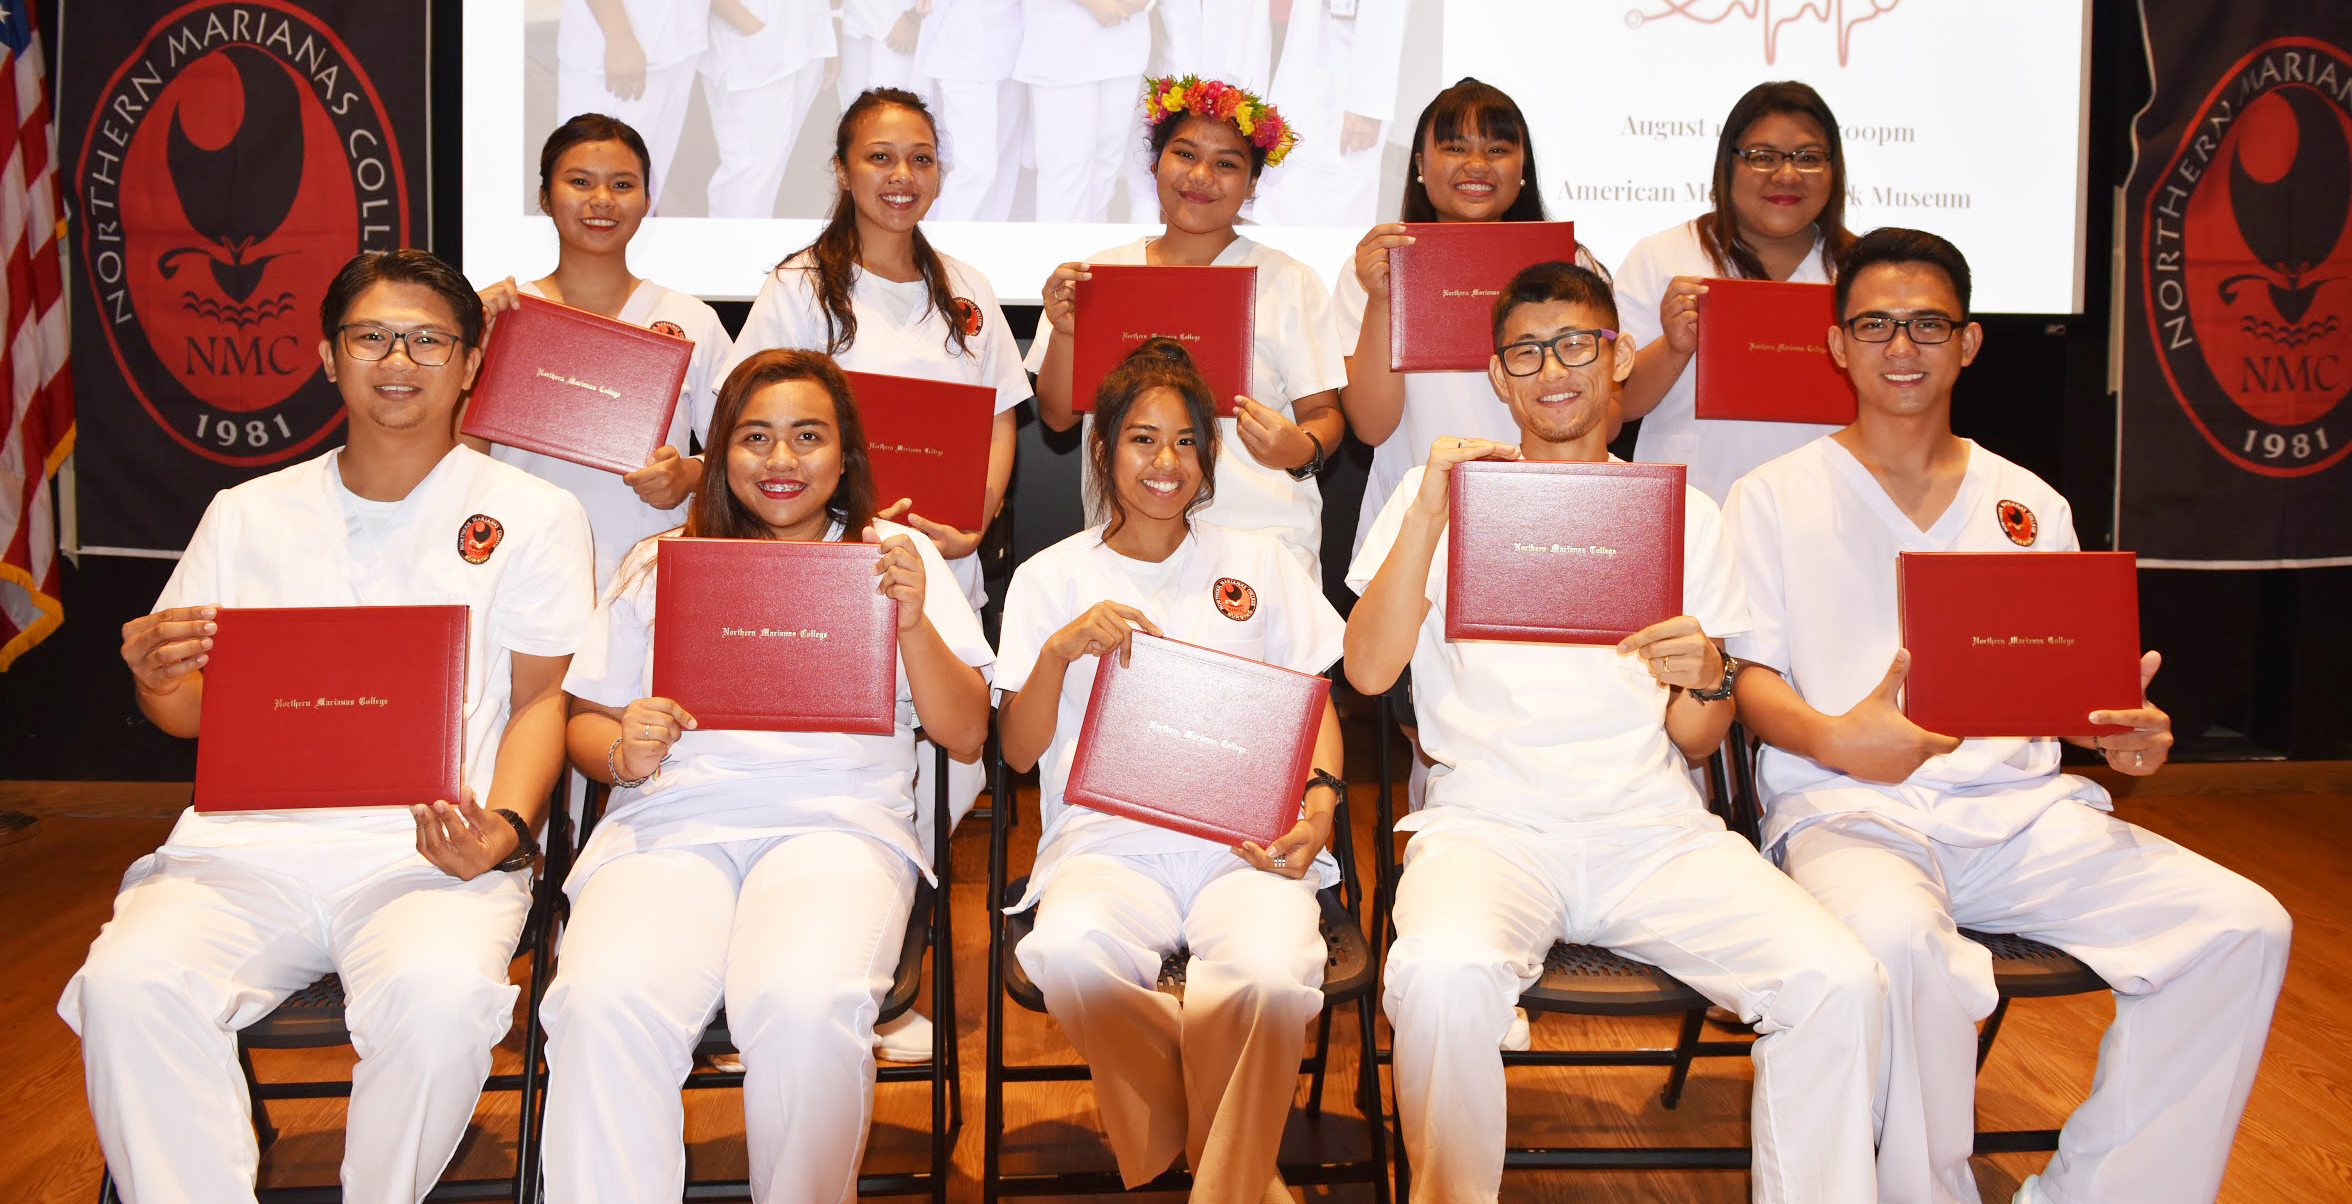 Nursing Students pose for a photo holding their certificates.